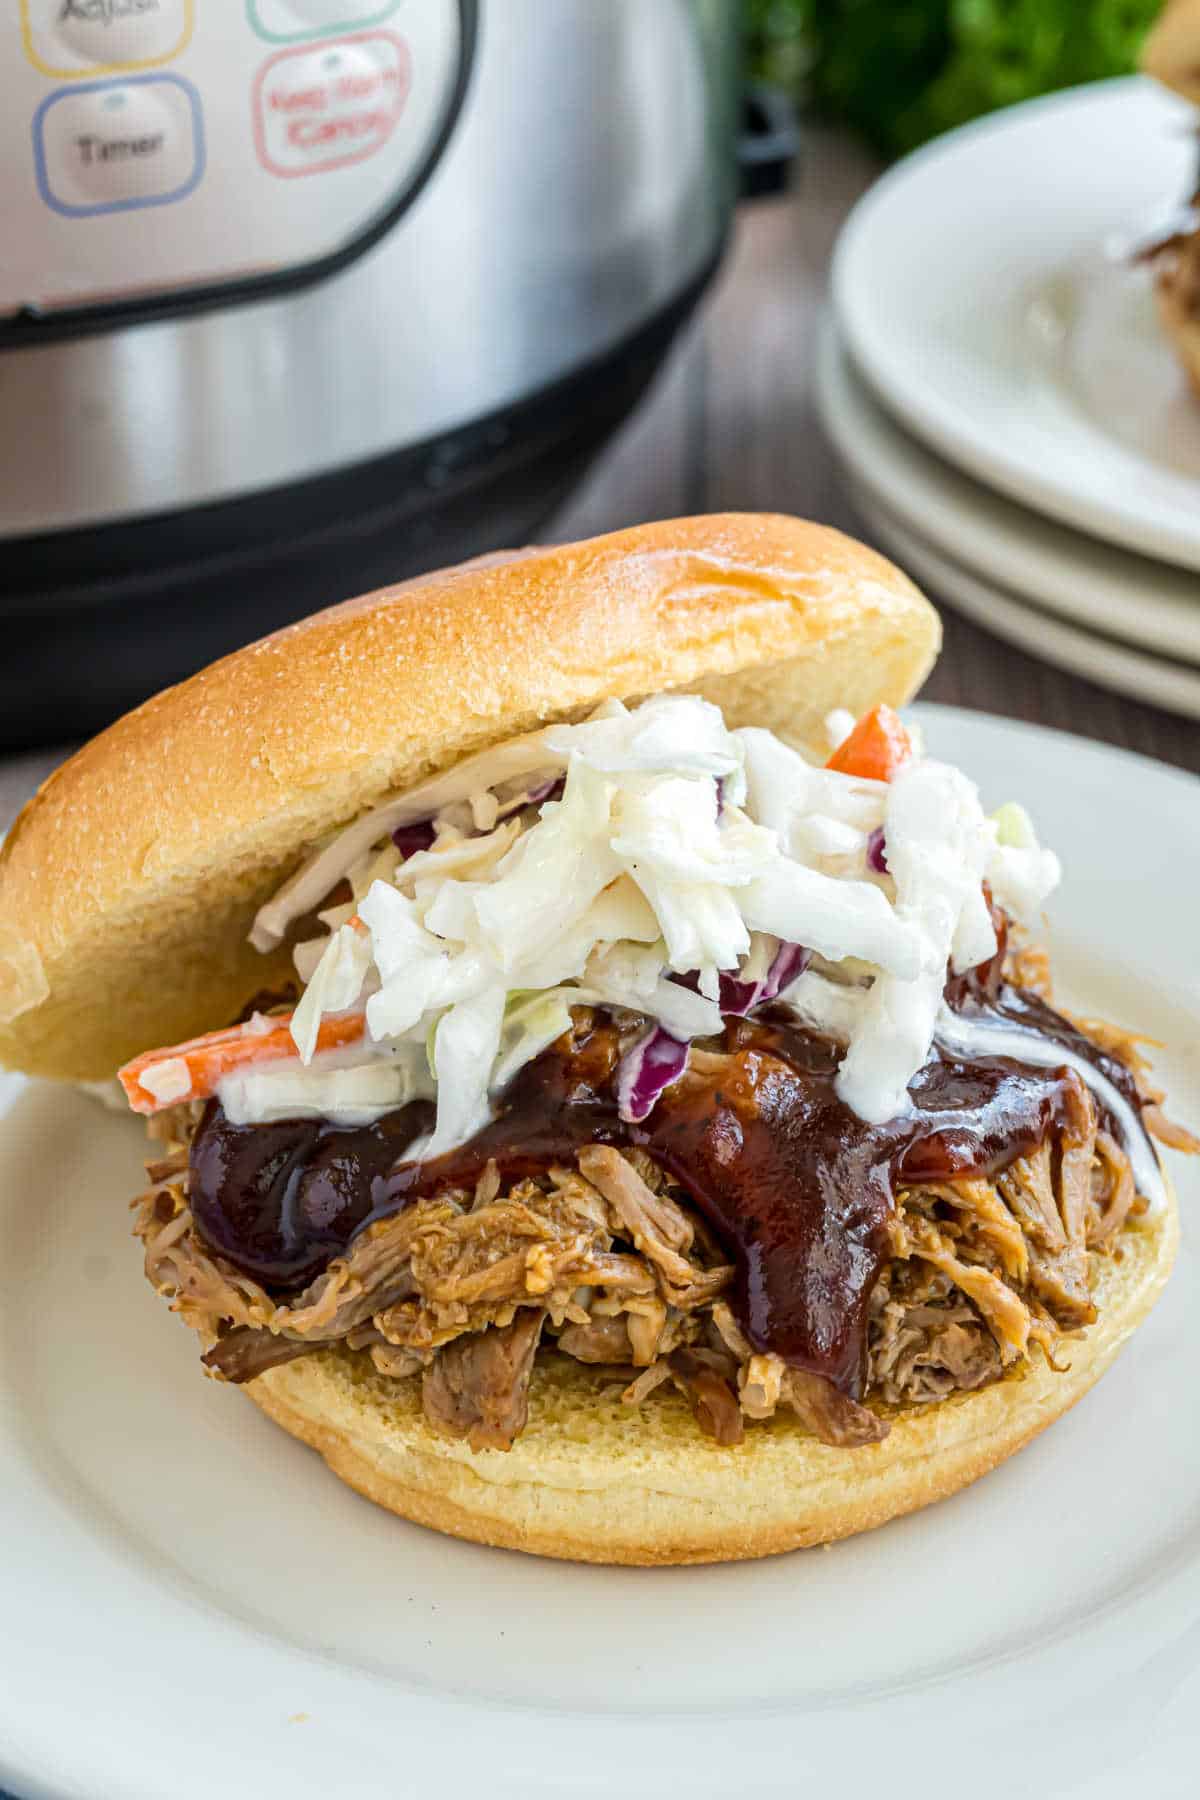 Pulled pork on a bun with cole slaw and bbq sauce.